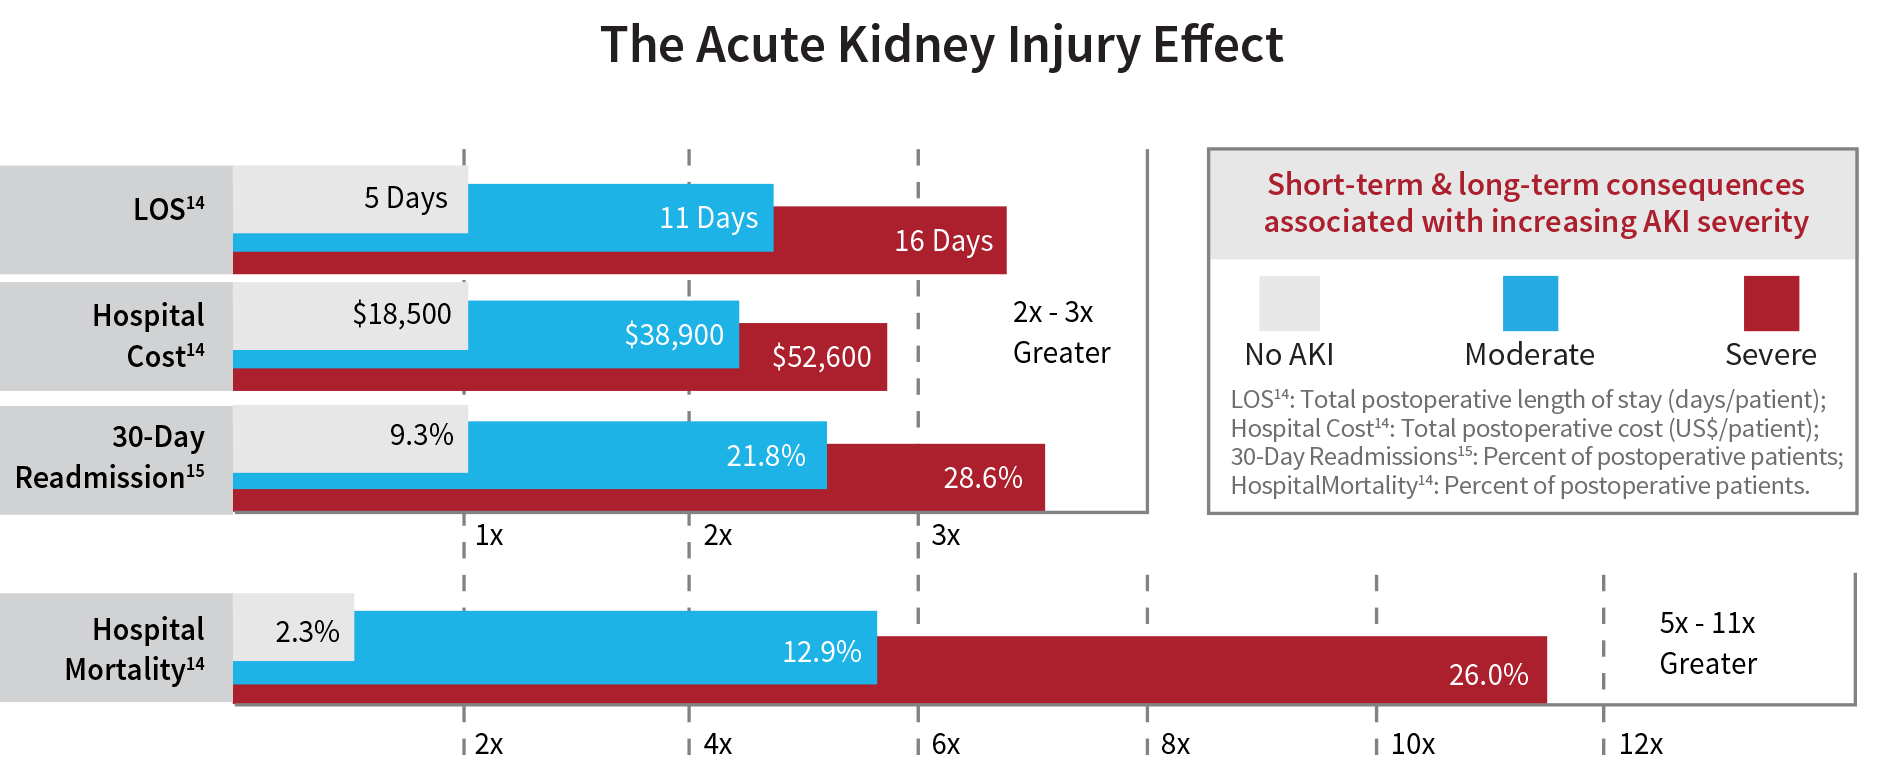 Acute kidney injury increases hospital stay lengths, treatment costs, hospital readmissions and mortality rates.